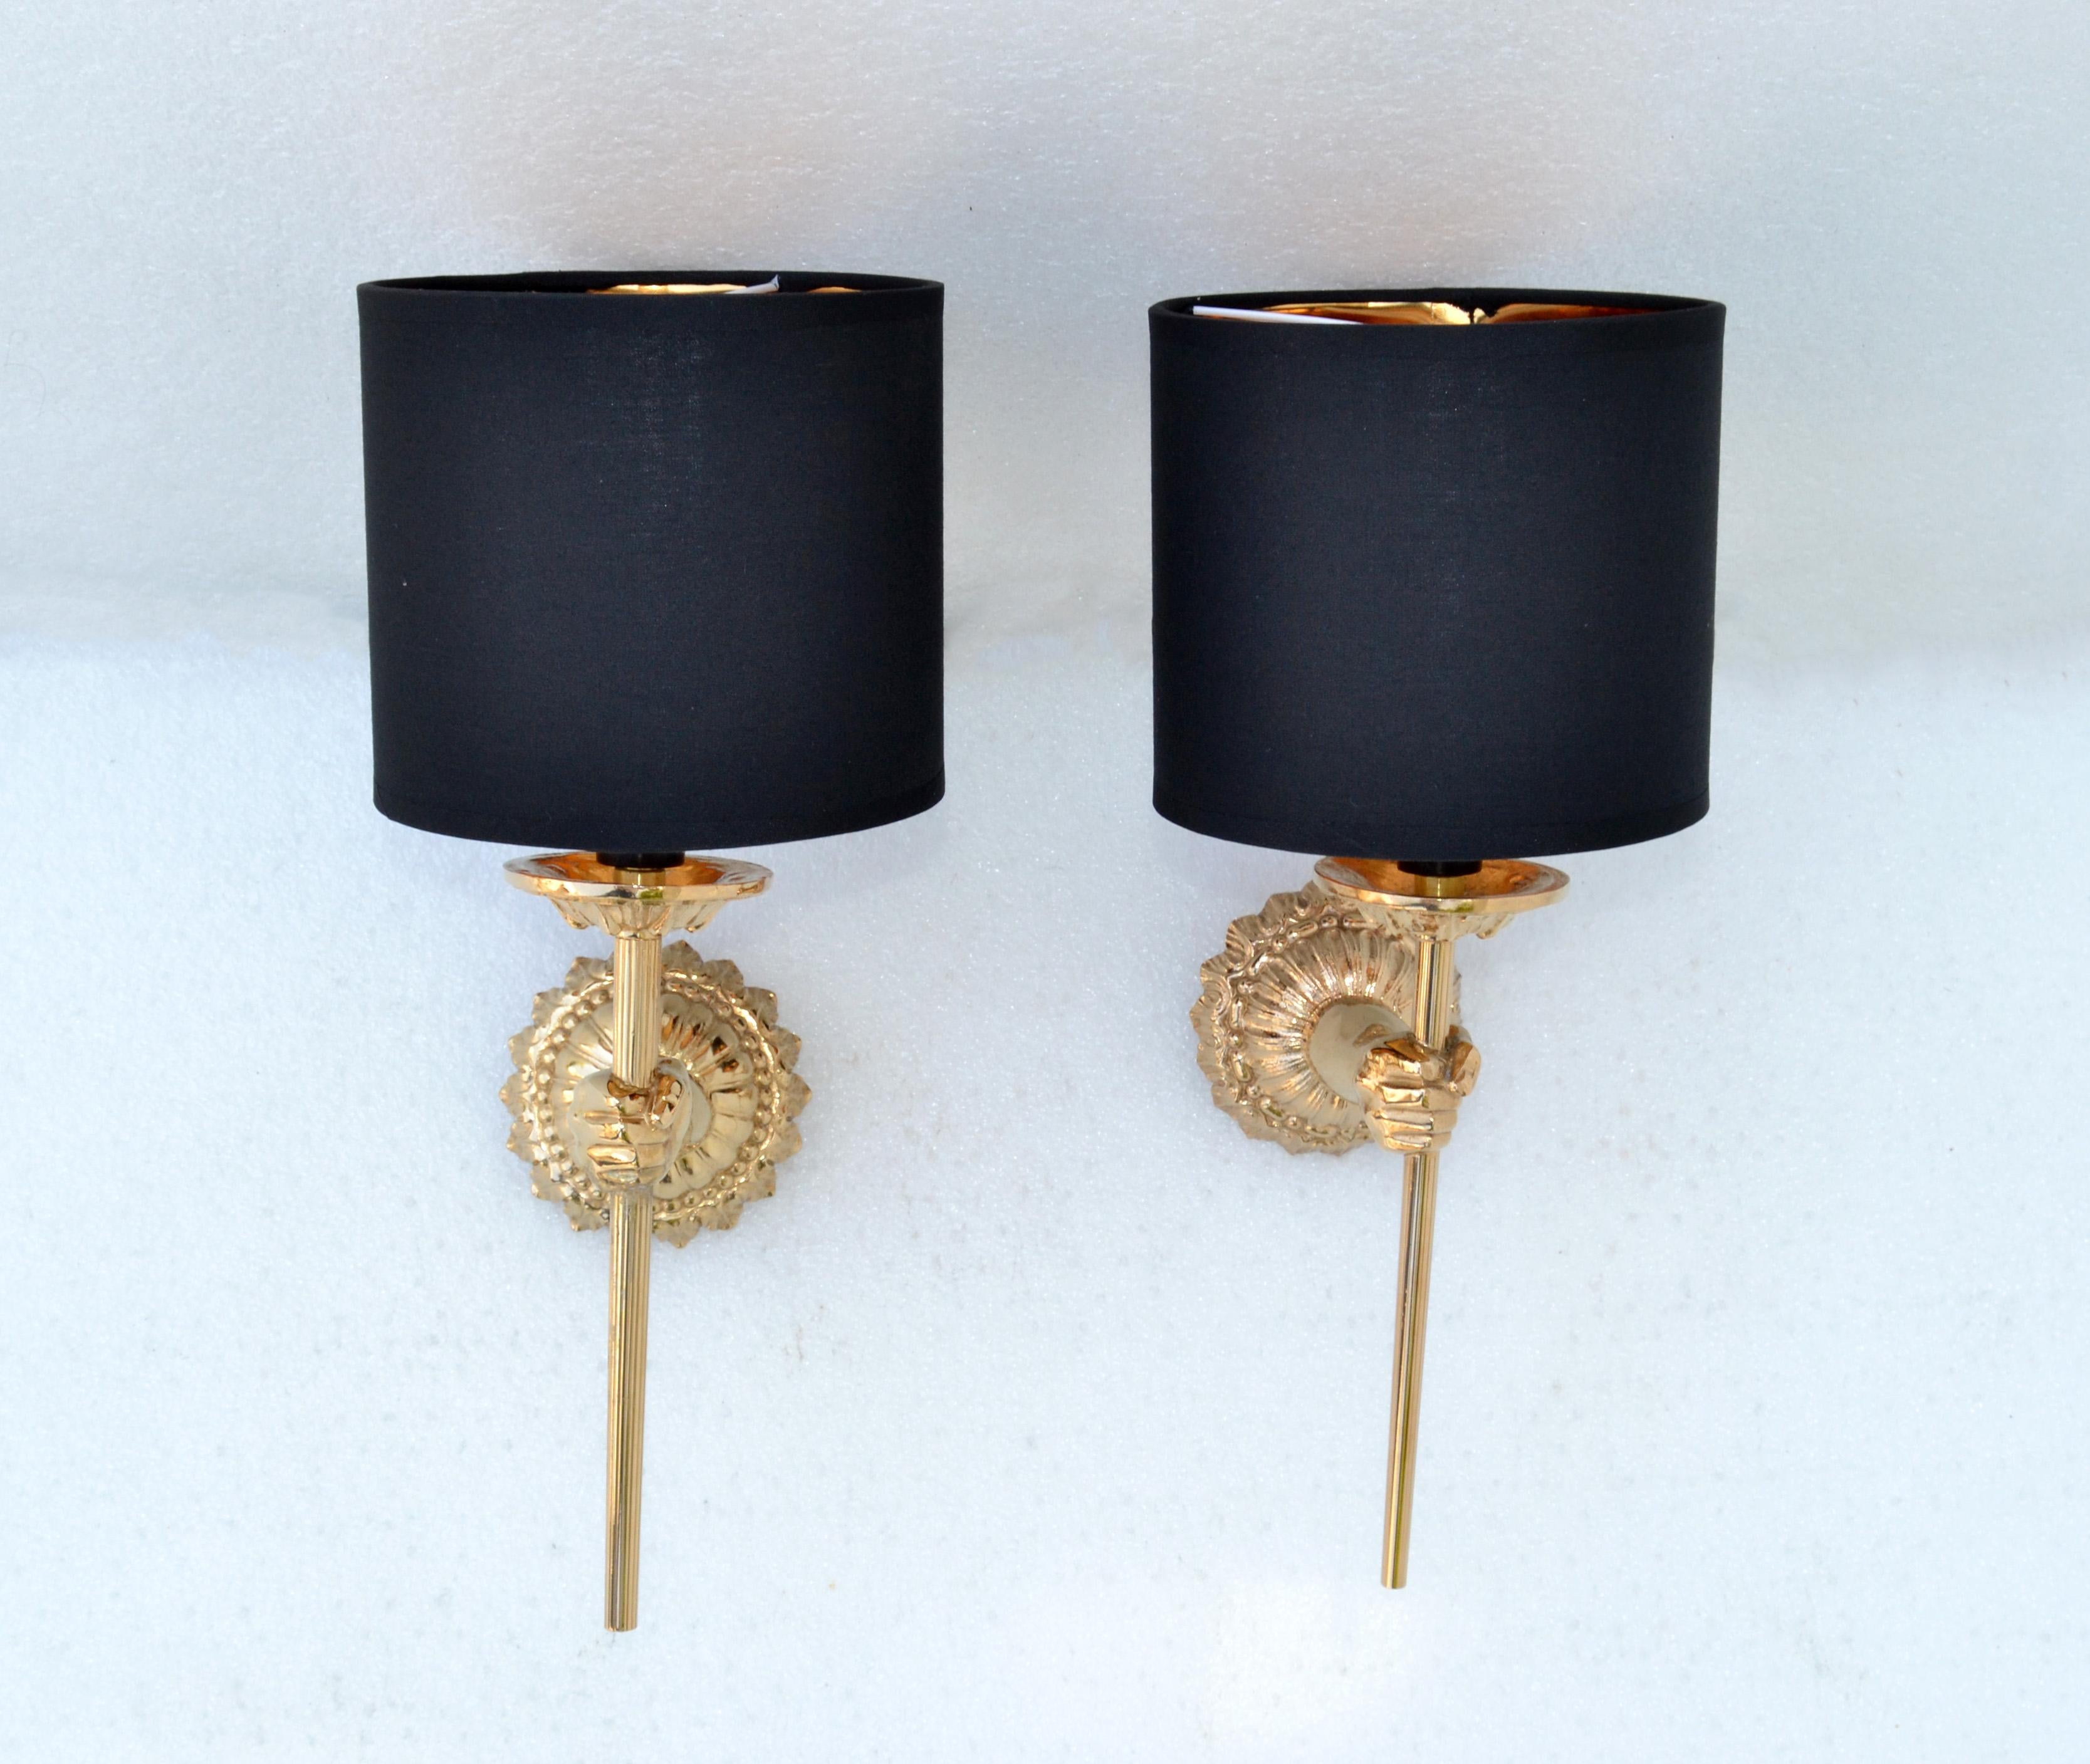 Polished Pair of Maison Lancel Sconces Gold Plated Hand Sconces Torch & Shade France 1960